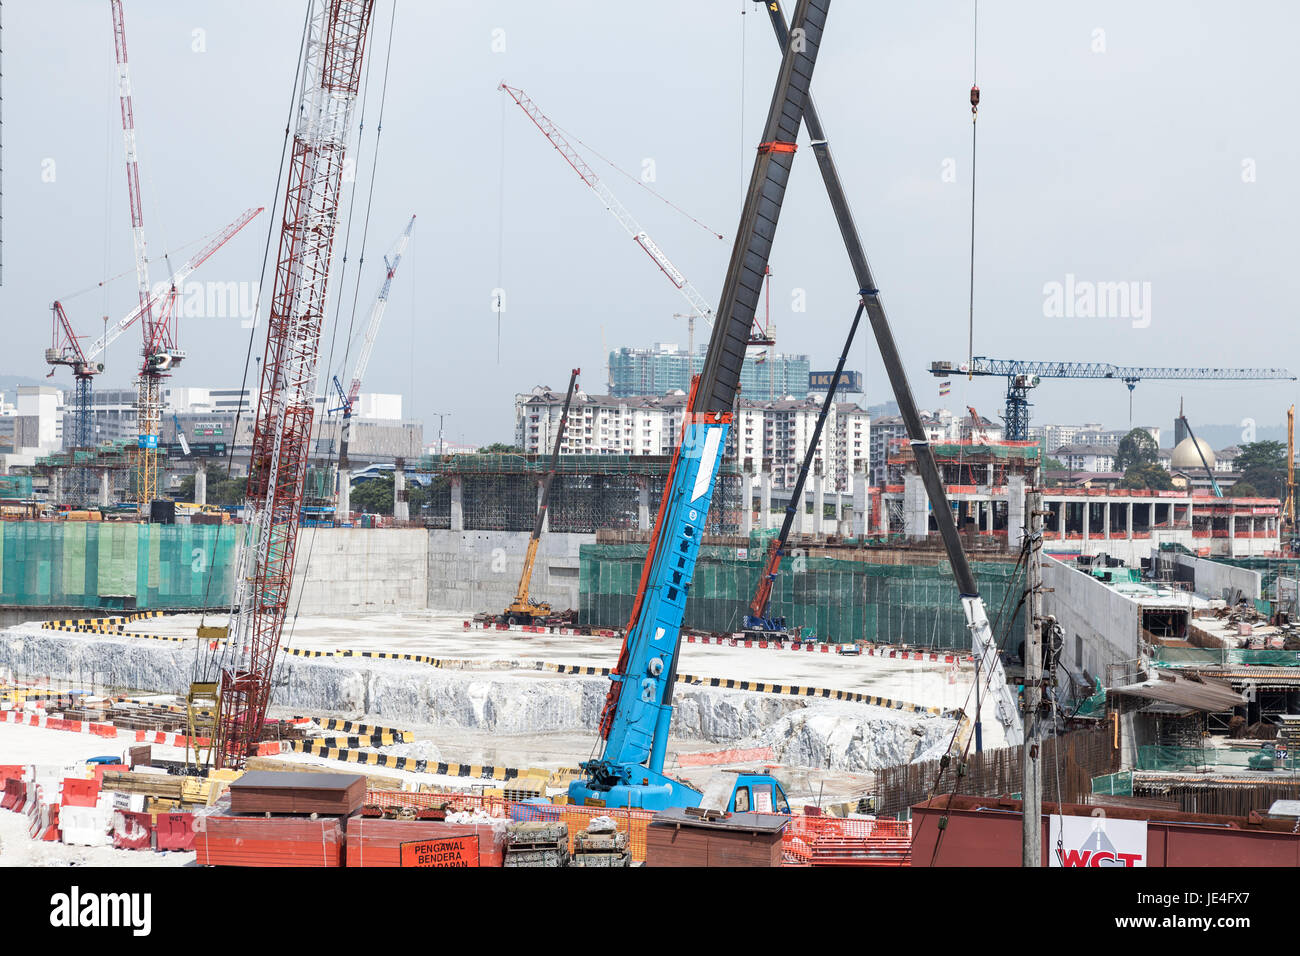 Cranes operate at the under construction Tun Razak Exchange financial district, developed by TRX City Sdn., in Kuala Lumpur, Malaysia Stock Photo